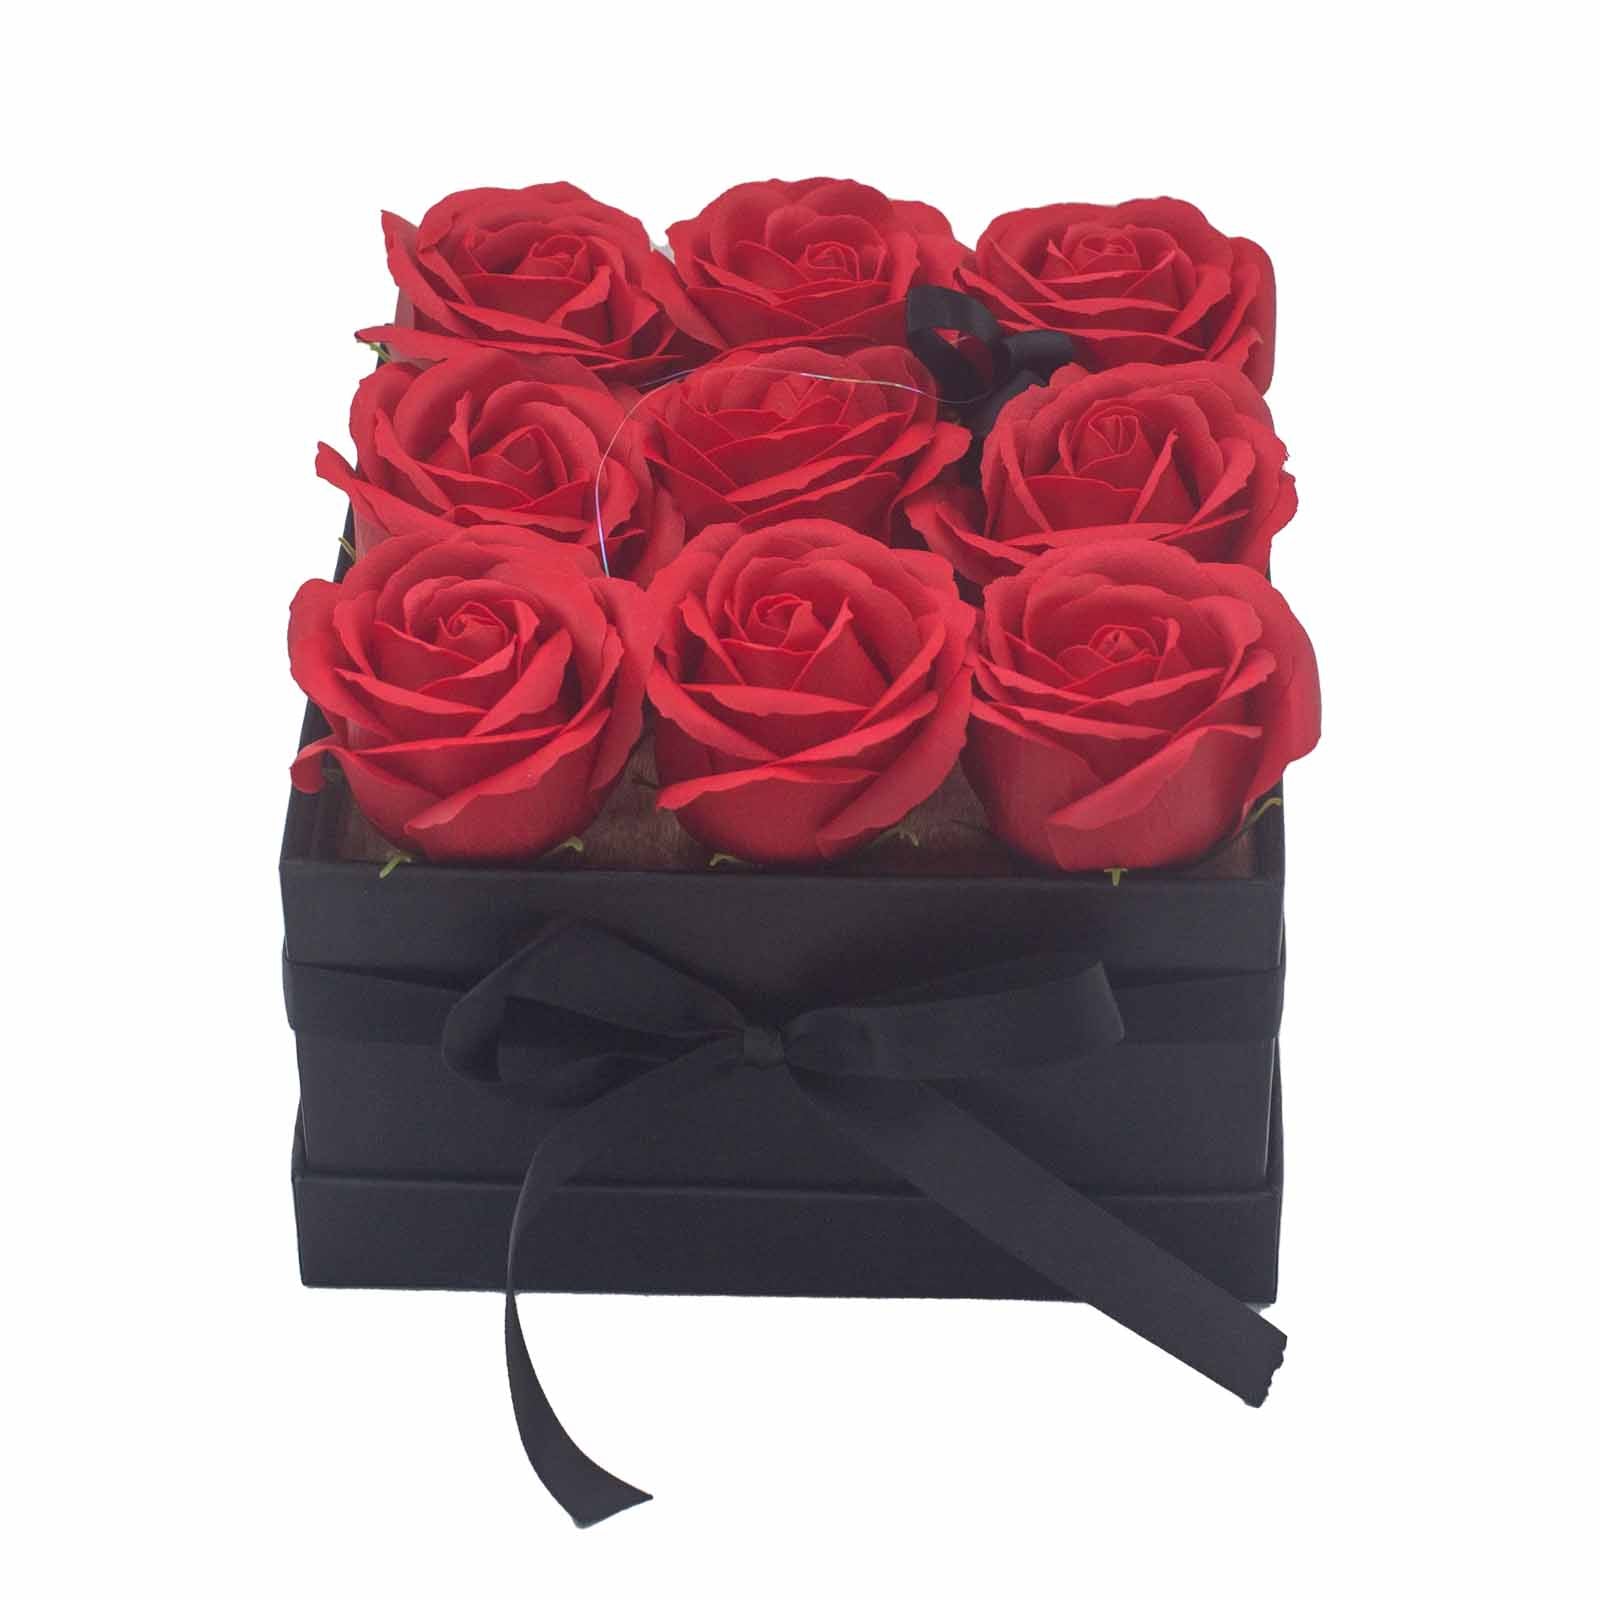 View Soap Flower Gift Bouquet 9 Red Roses Square information